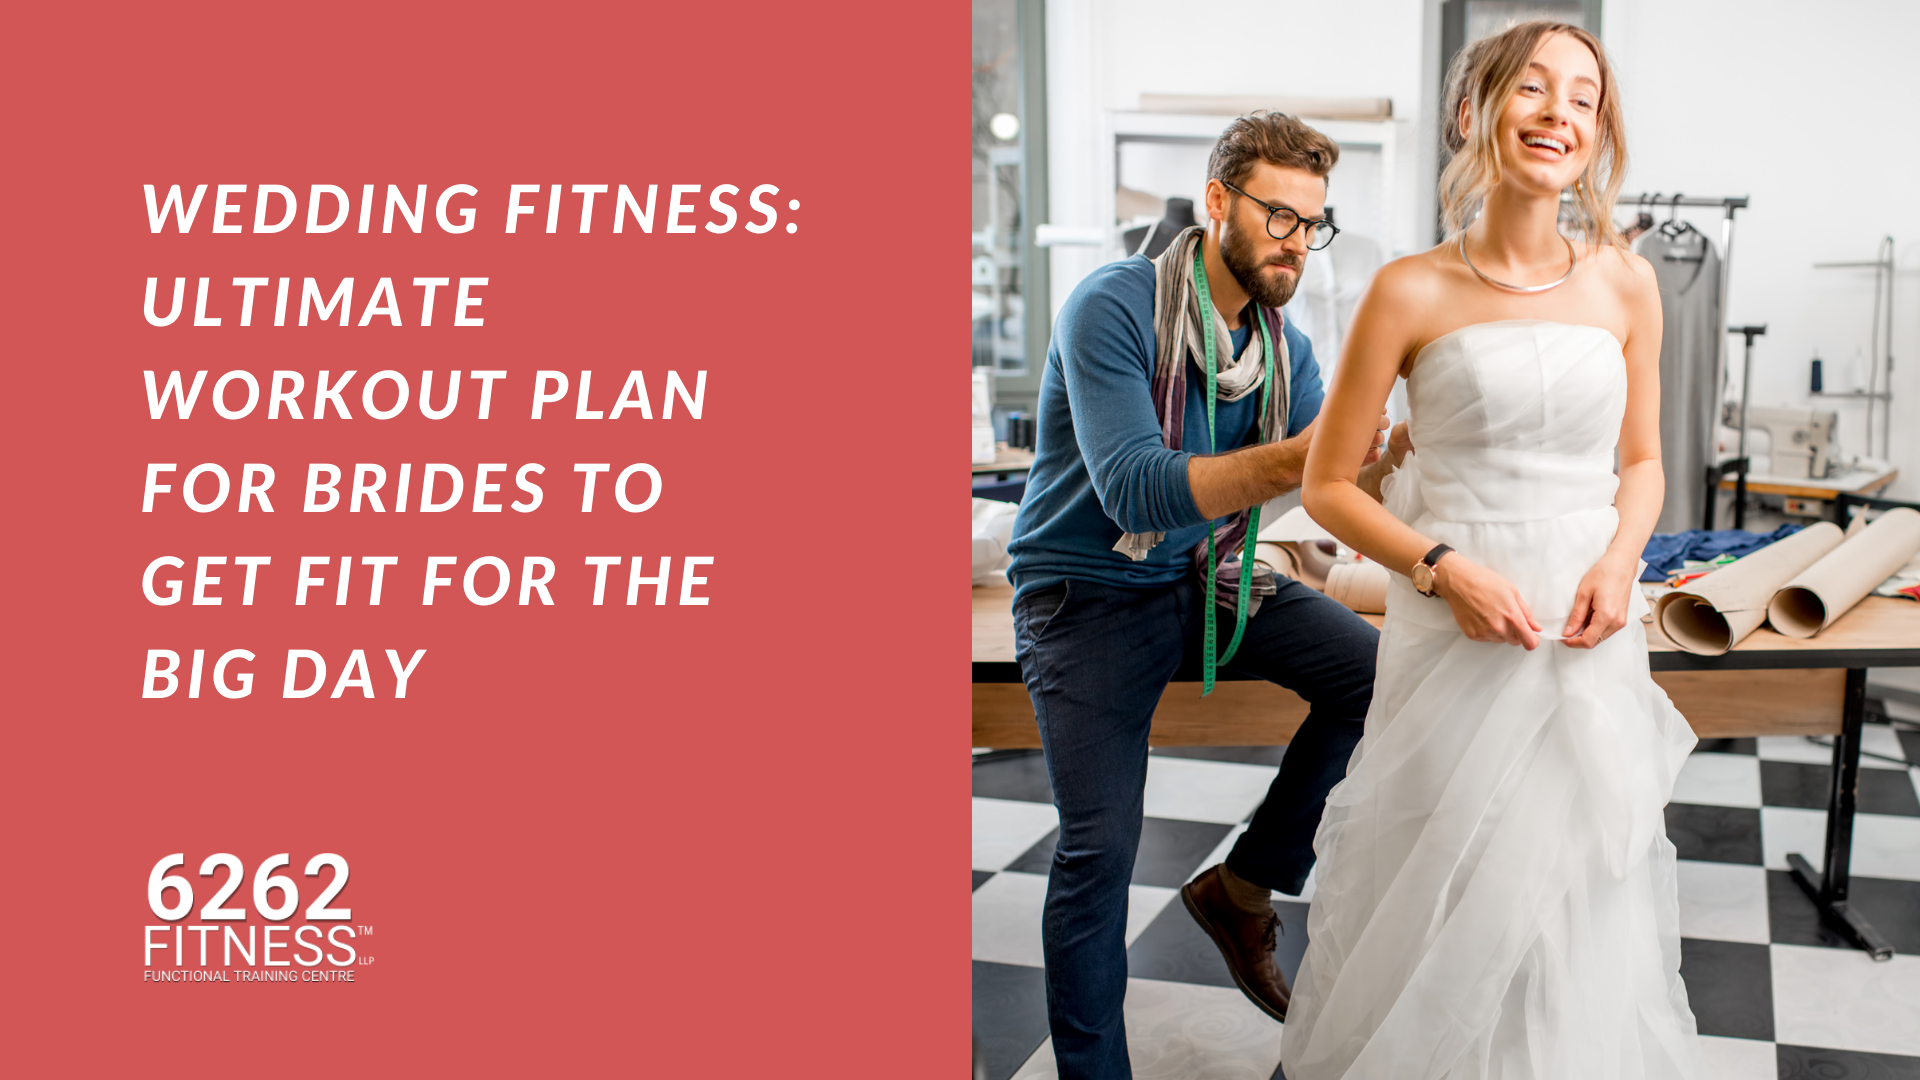 Wedding Fitness: Ultimate Workout Plan For Brides to get Fit for the Big Day